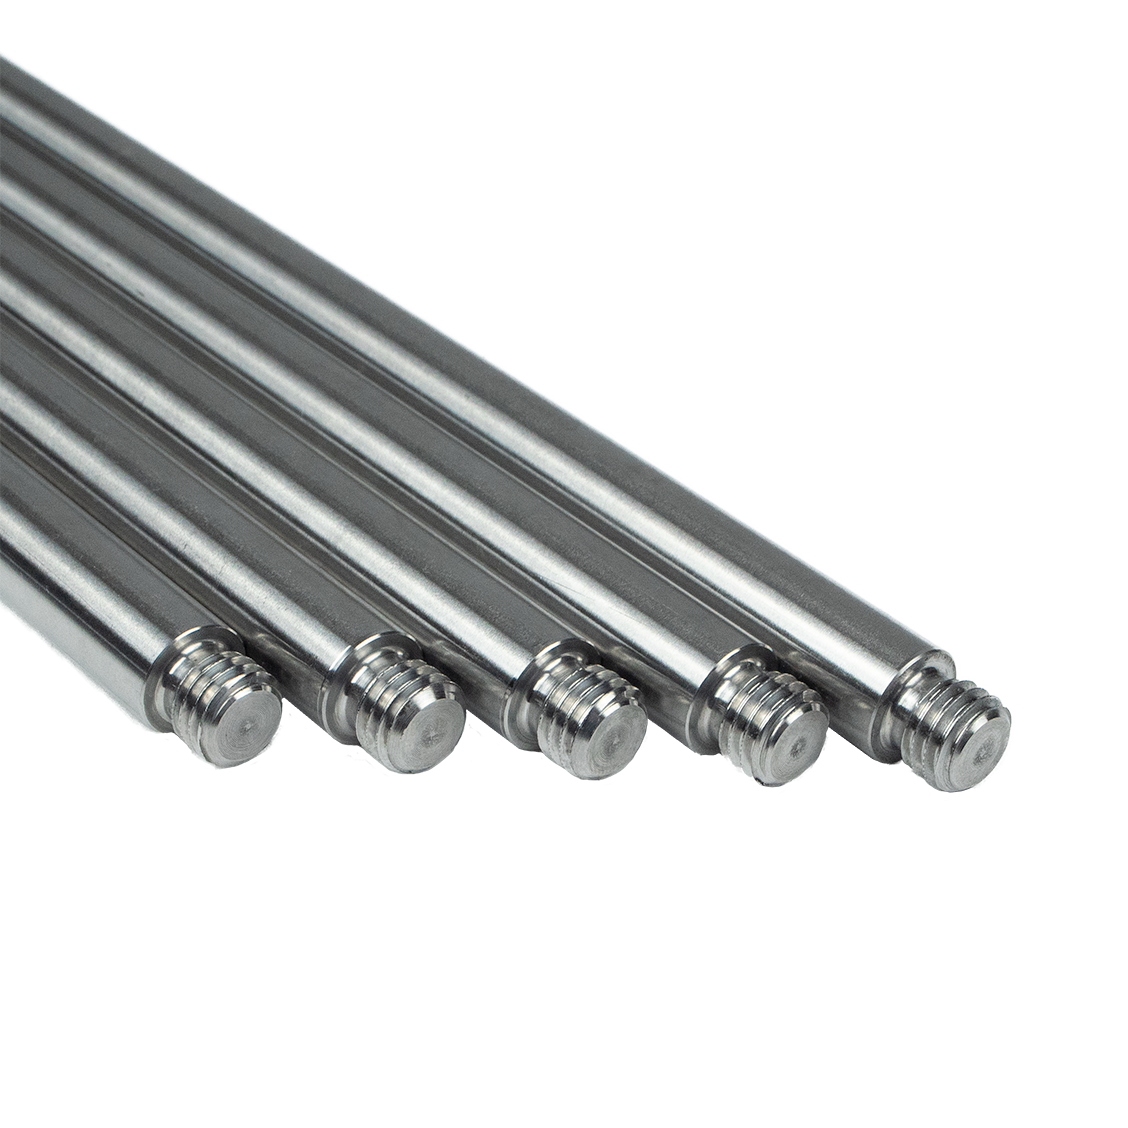 Threaded Stand Rod M10 - Ø 10 mm, length 600 mm - stainless steel